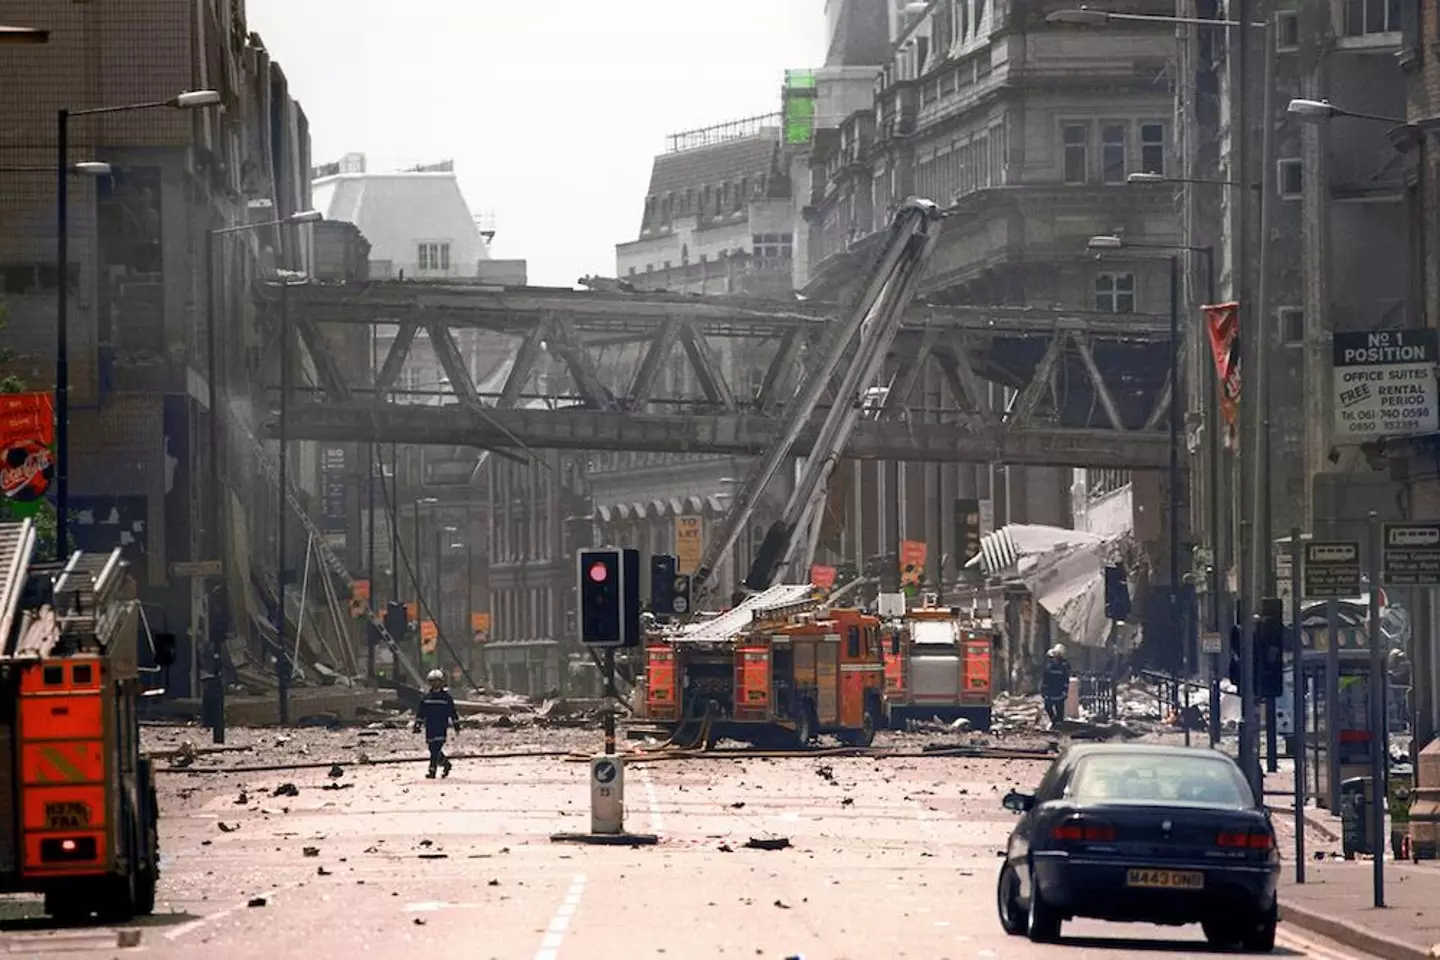 An IRA bomb blasted in Manchester city centre in 1996.